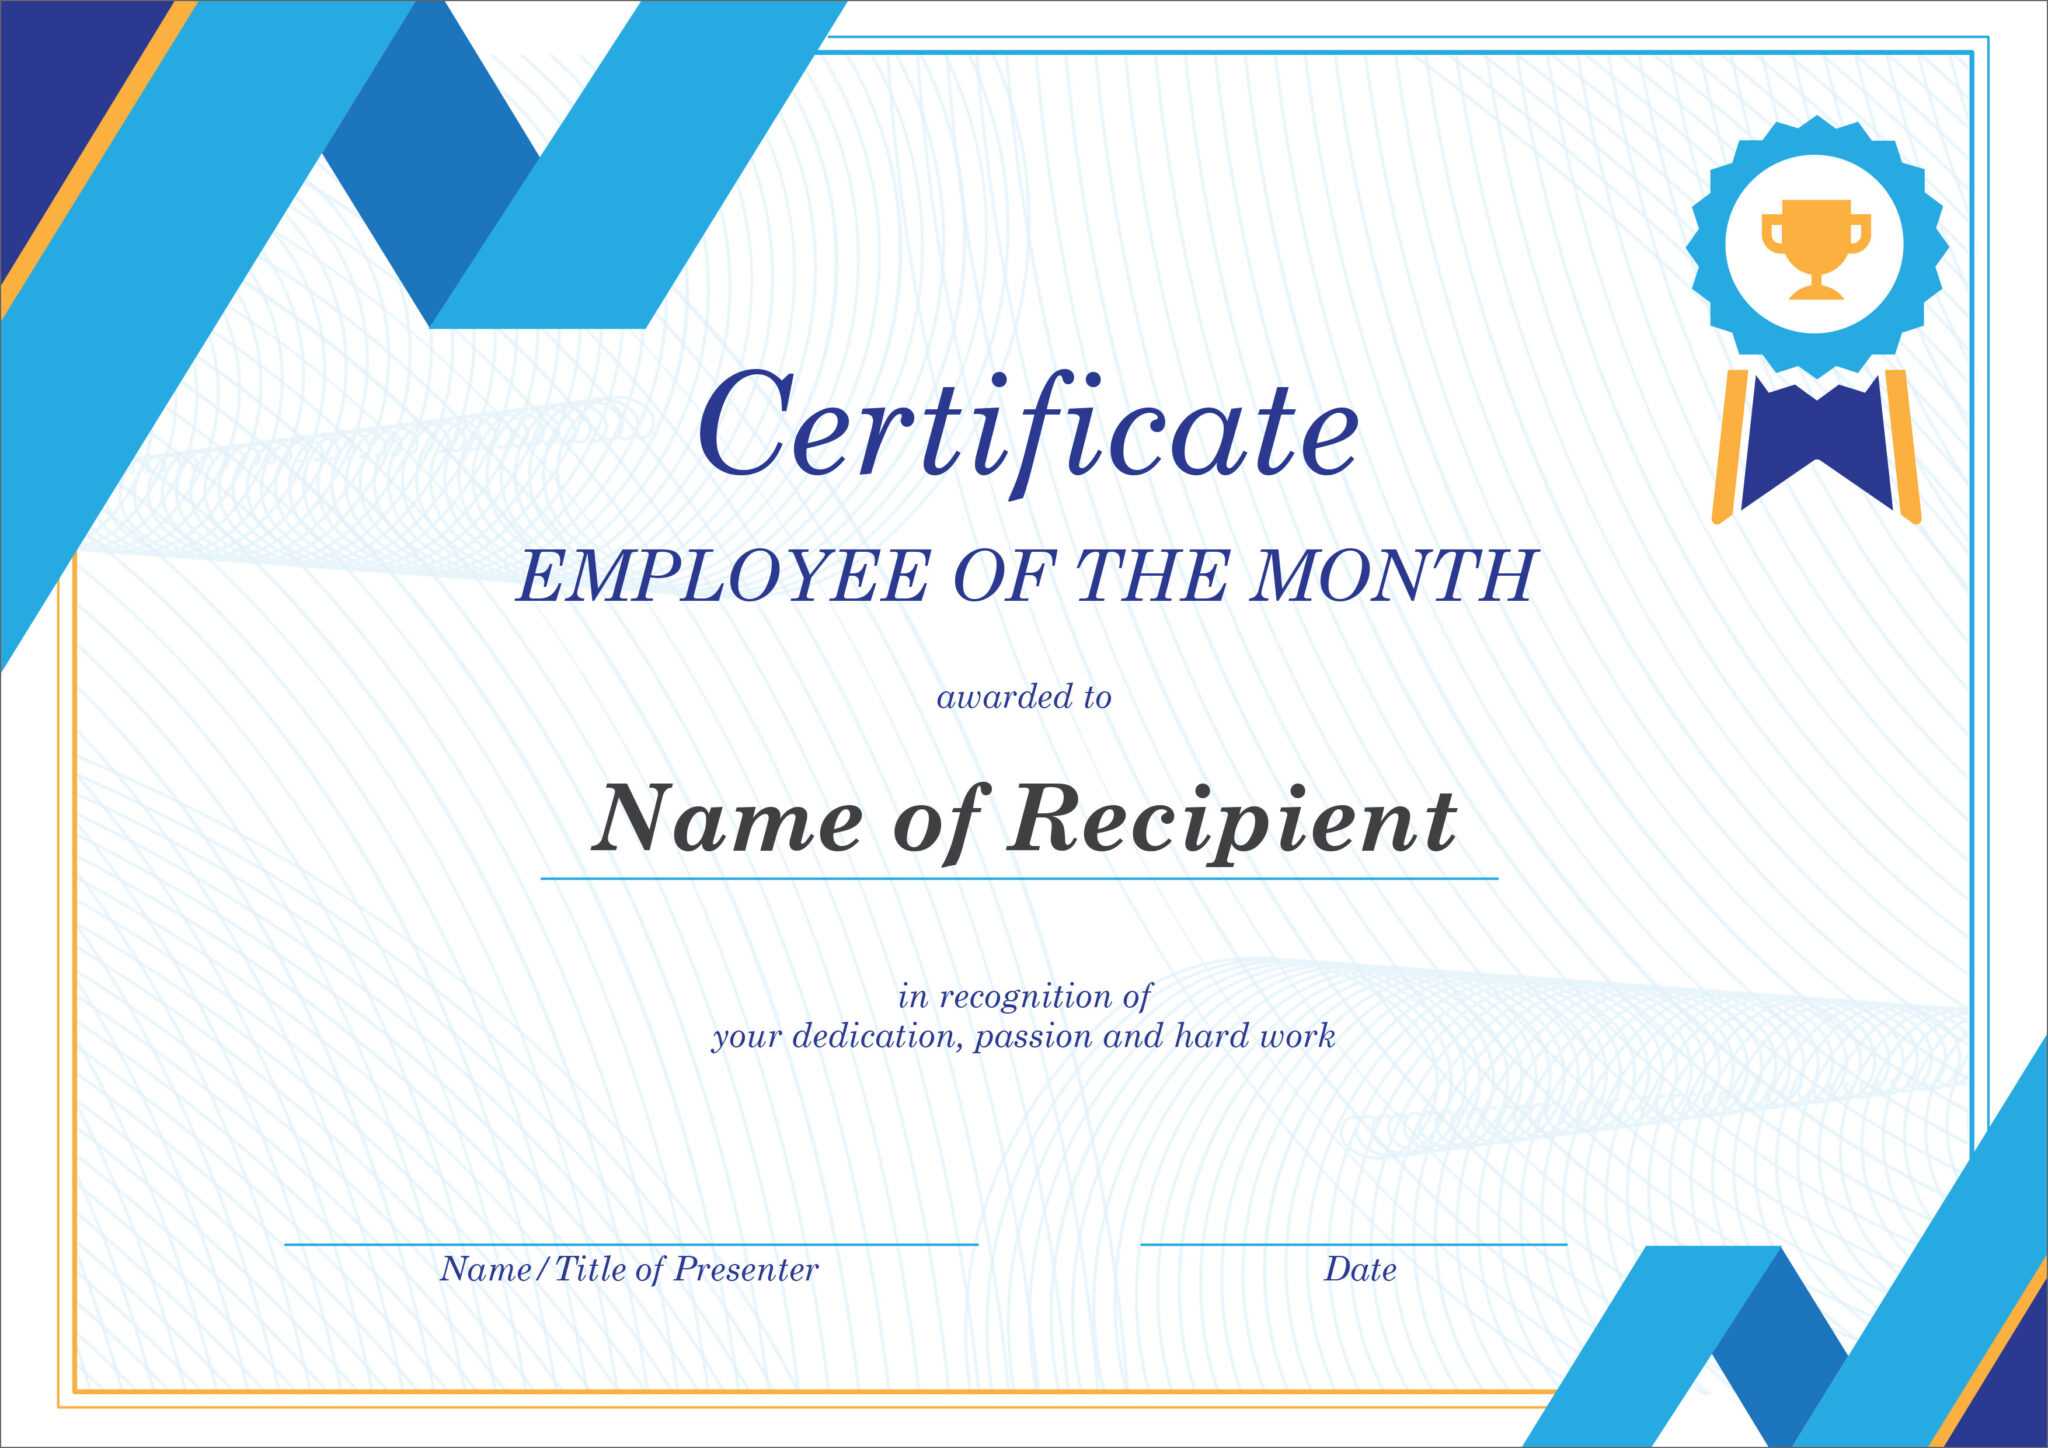 Certificate Photoshop Template Free Download